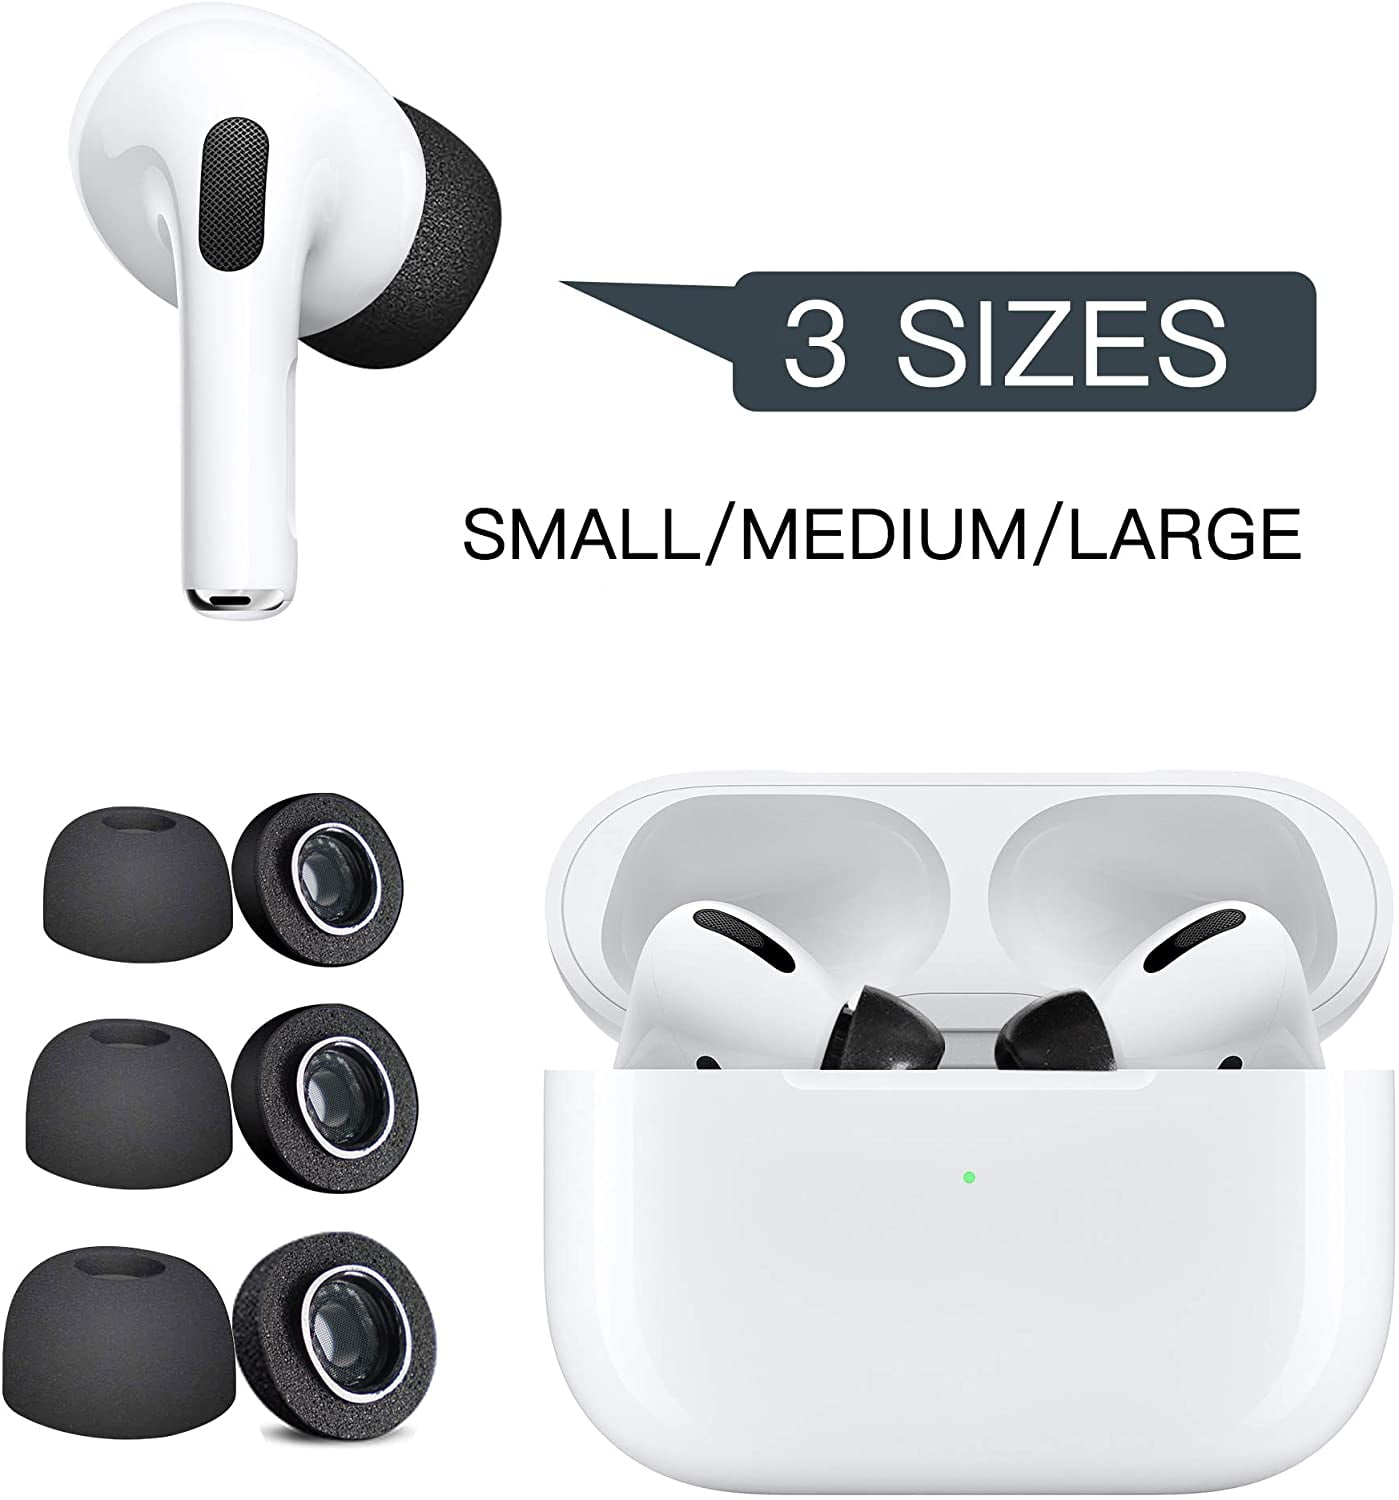 Black Memory Foam Replacement Tips for Apple Airpod Pro